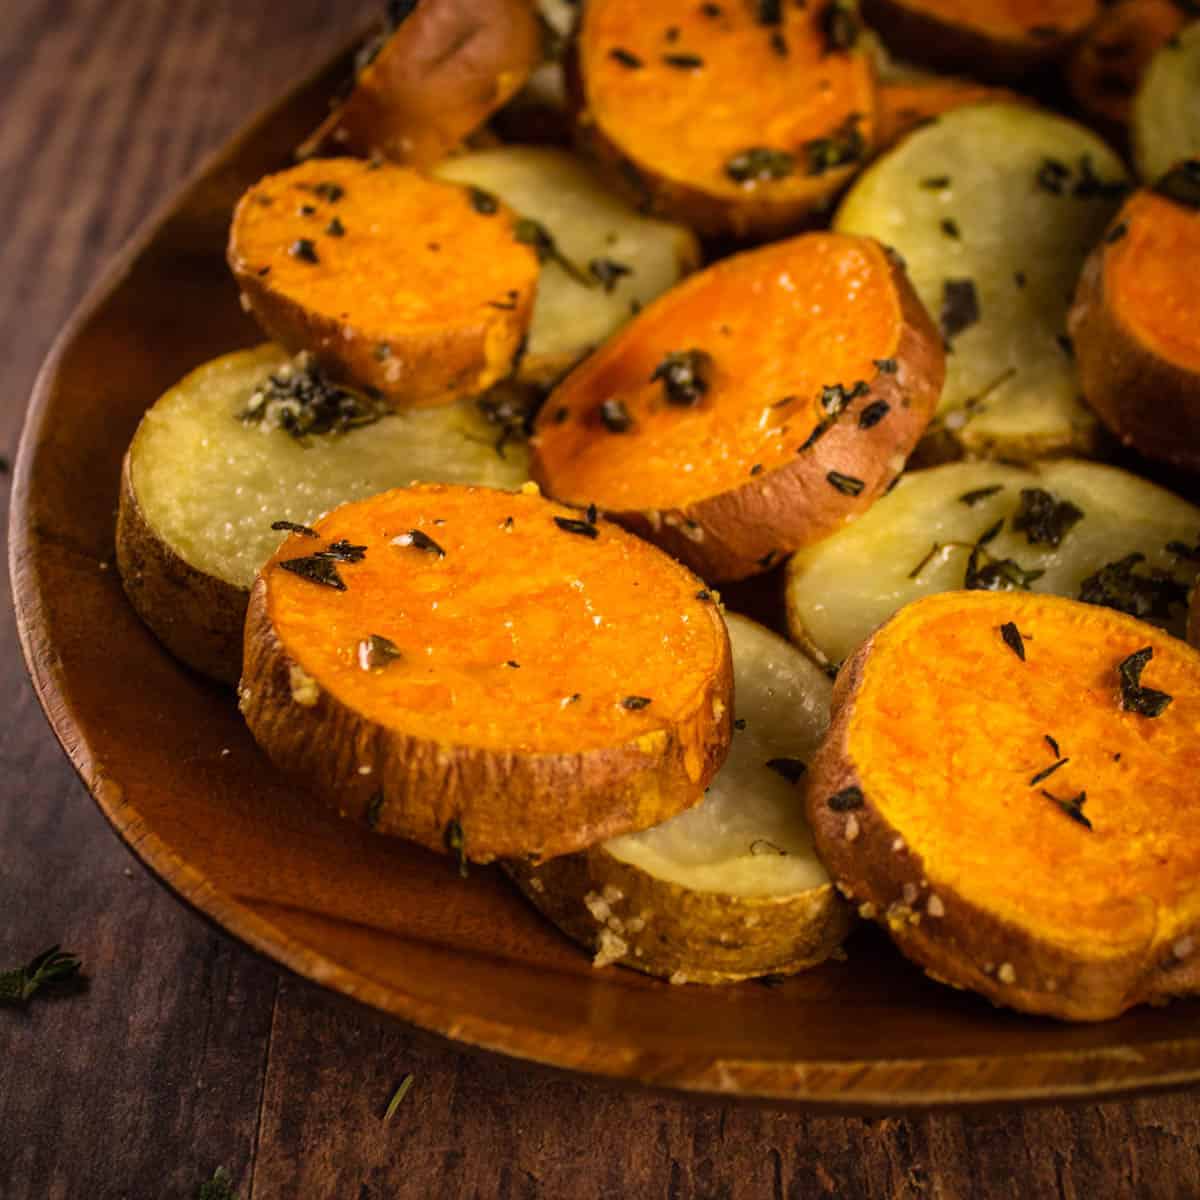 roasted sweet and russet potato slices with fresh herbs